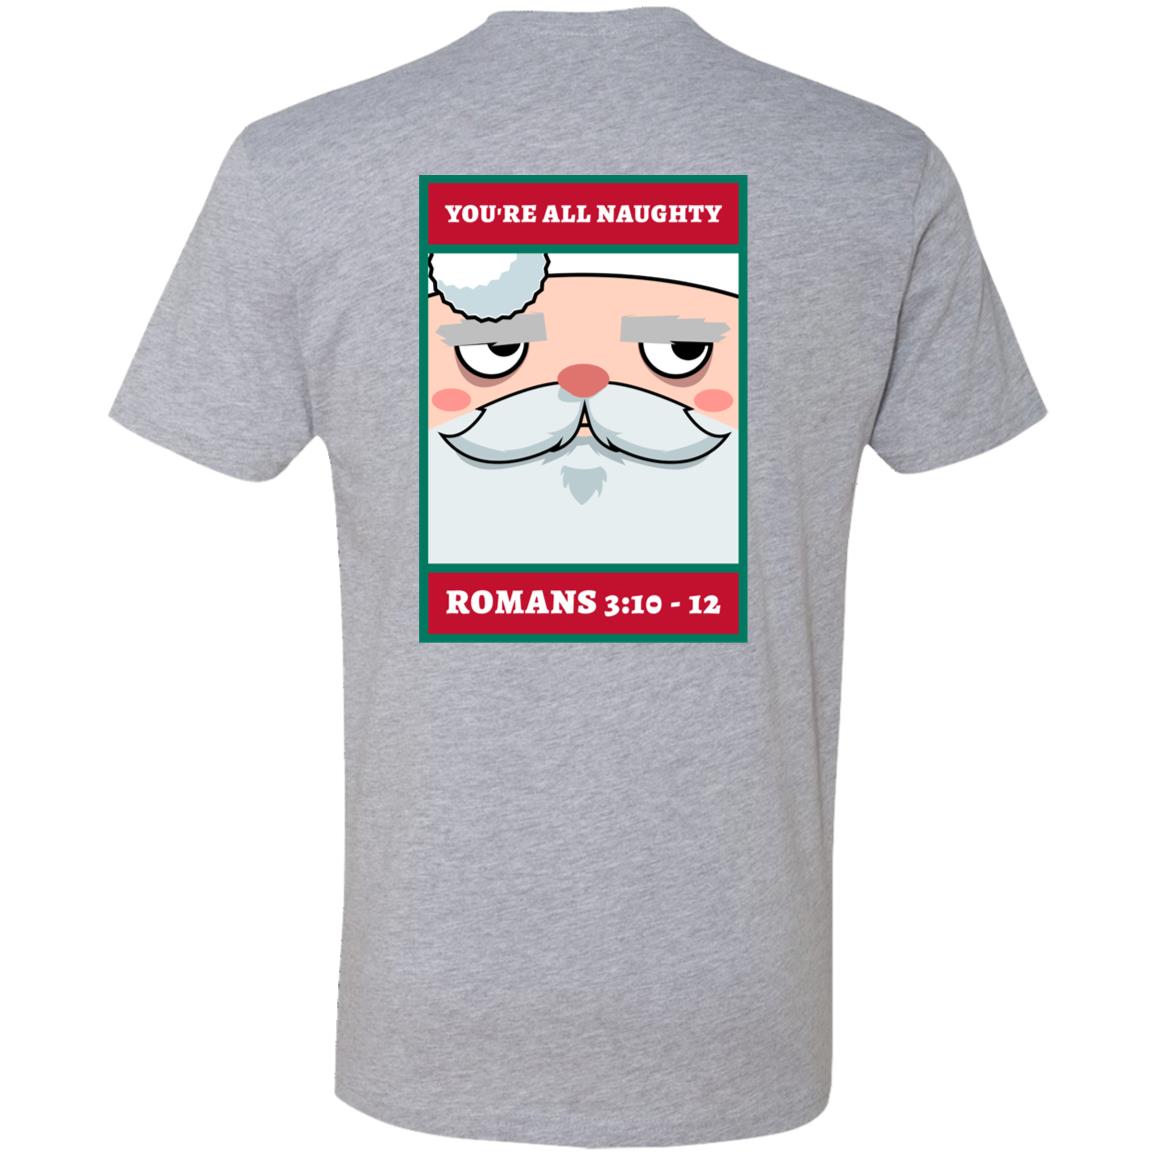 You're All Naughty (Unisex tee)